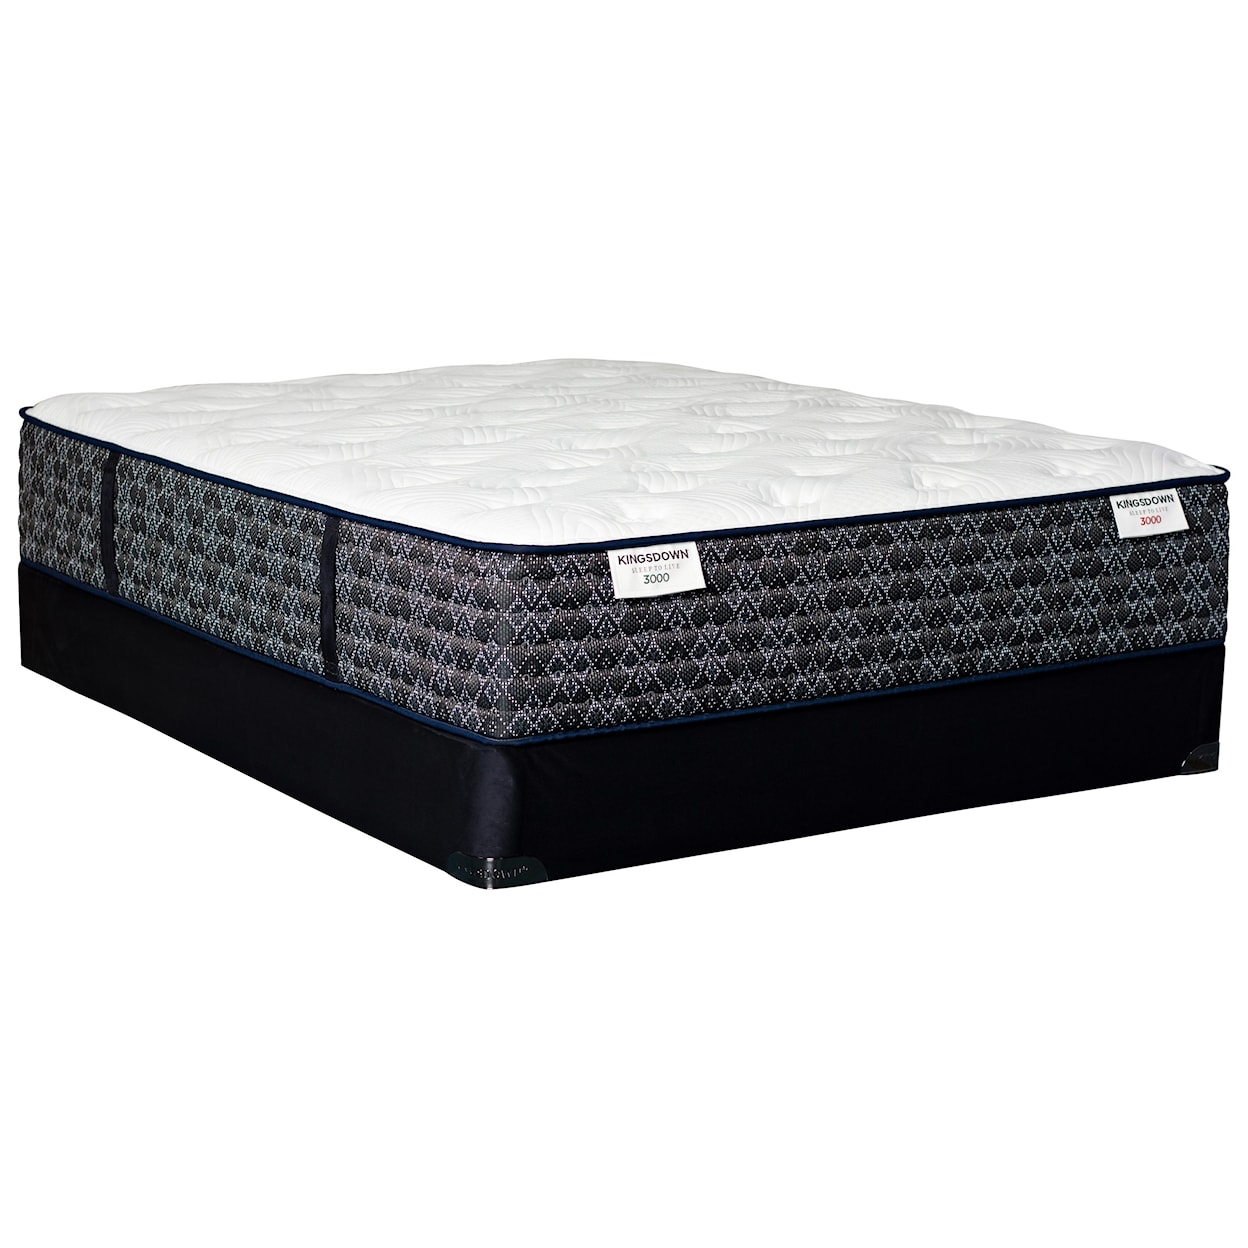 Kingsdown Sleep to Live 3000 Gold Blue King Pocketed Coil Mattress LoPro Set